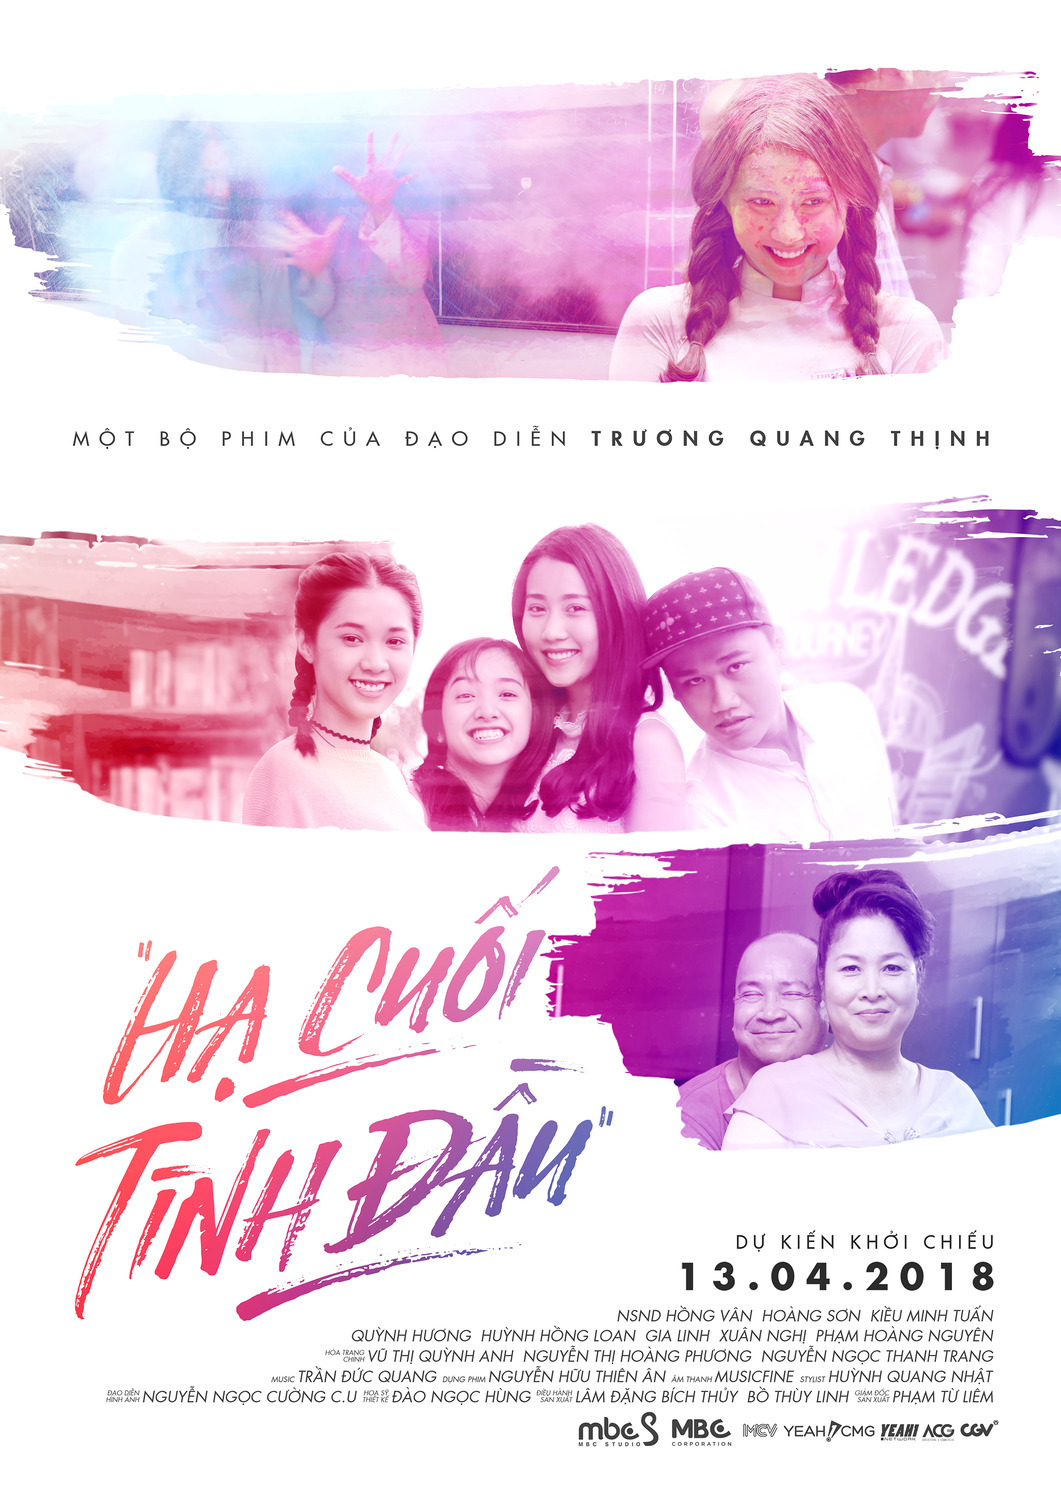 Extra Large Movie Poster Image for Hạ cuối tình đầu (#1 of 8)